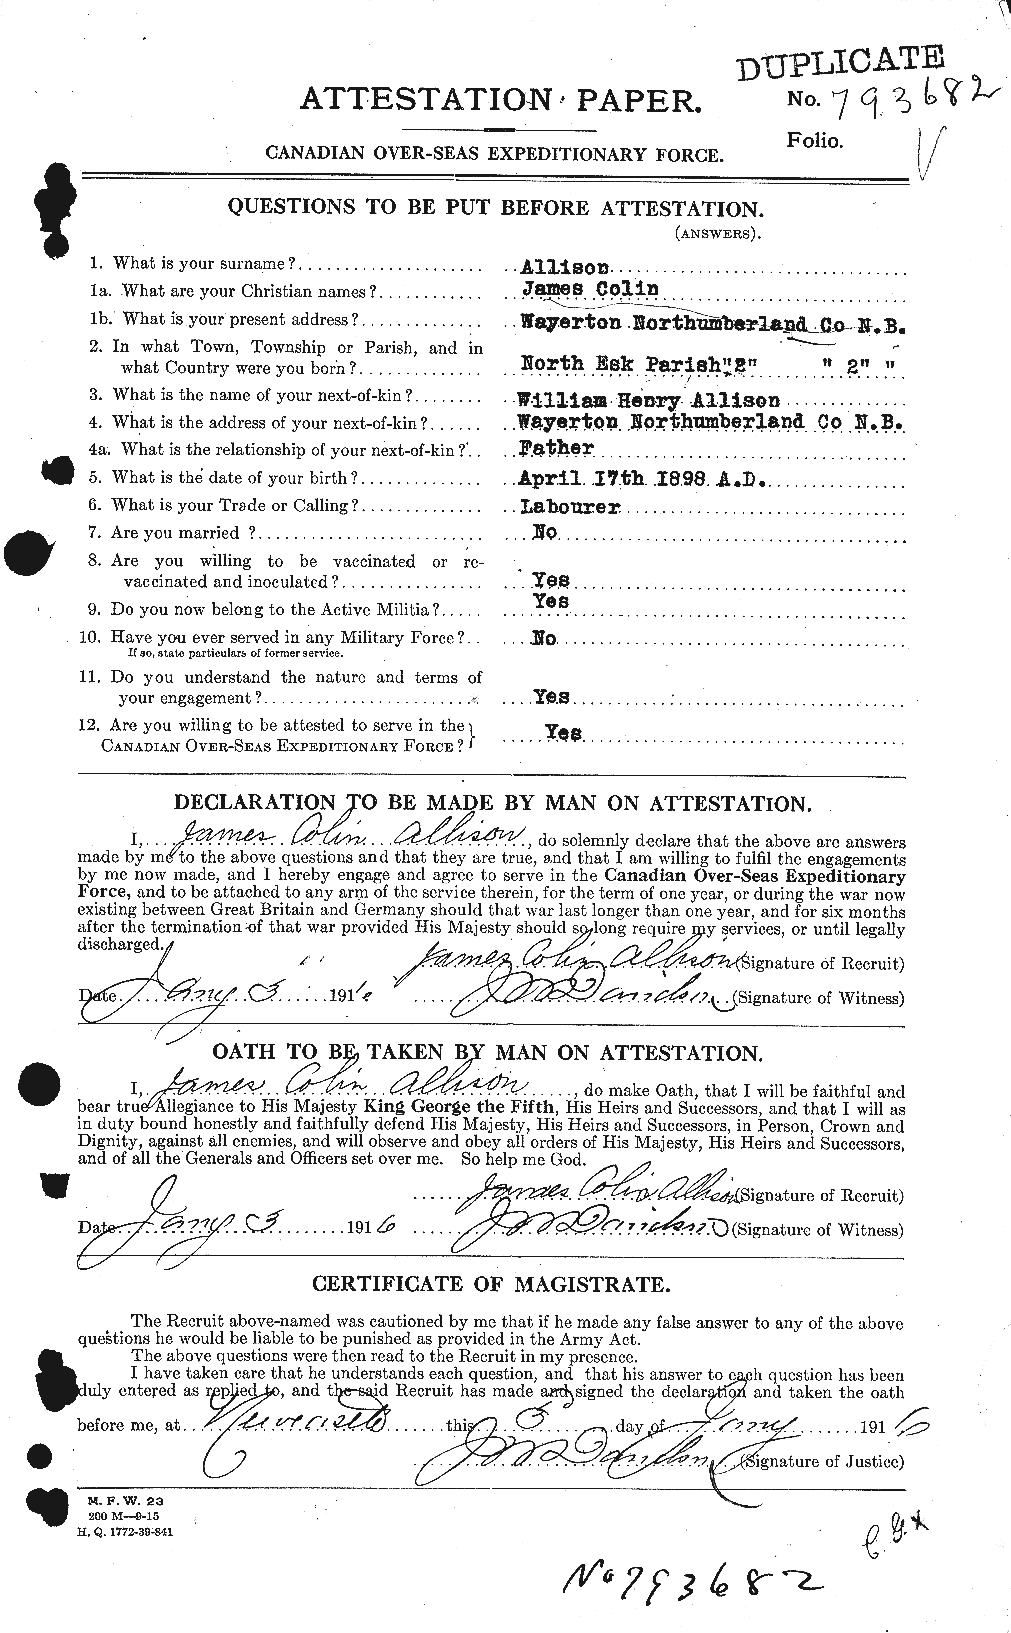 Personnel Records of the First World War - CEF 208530a